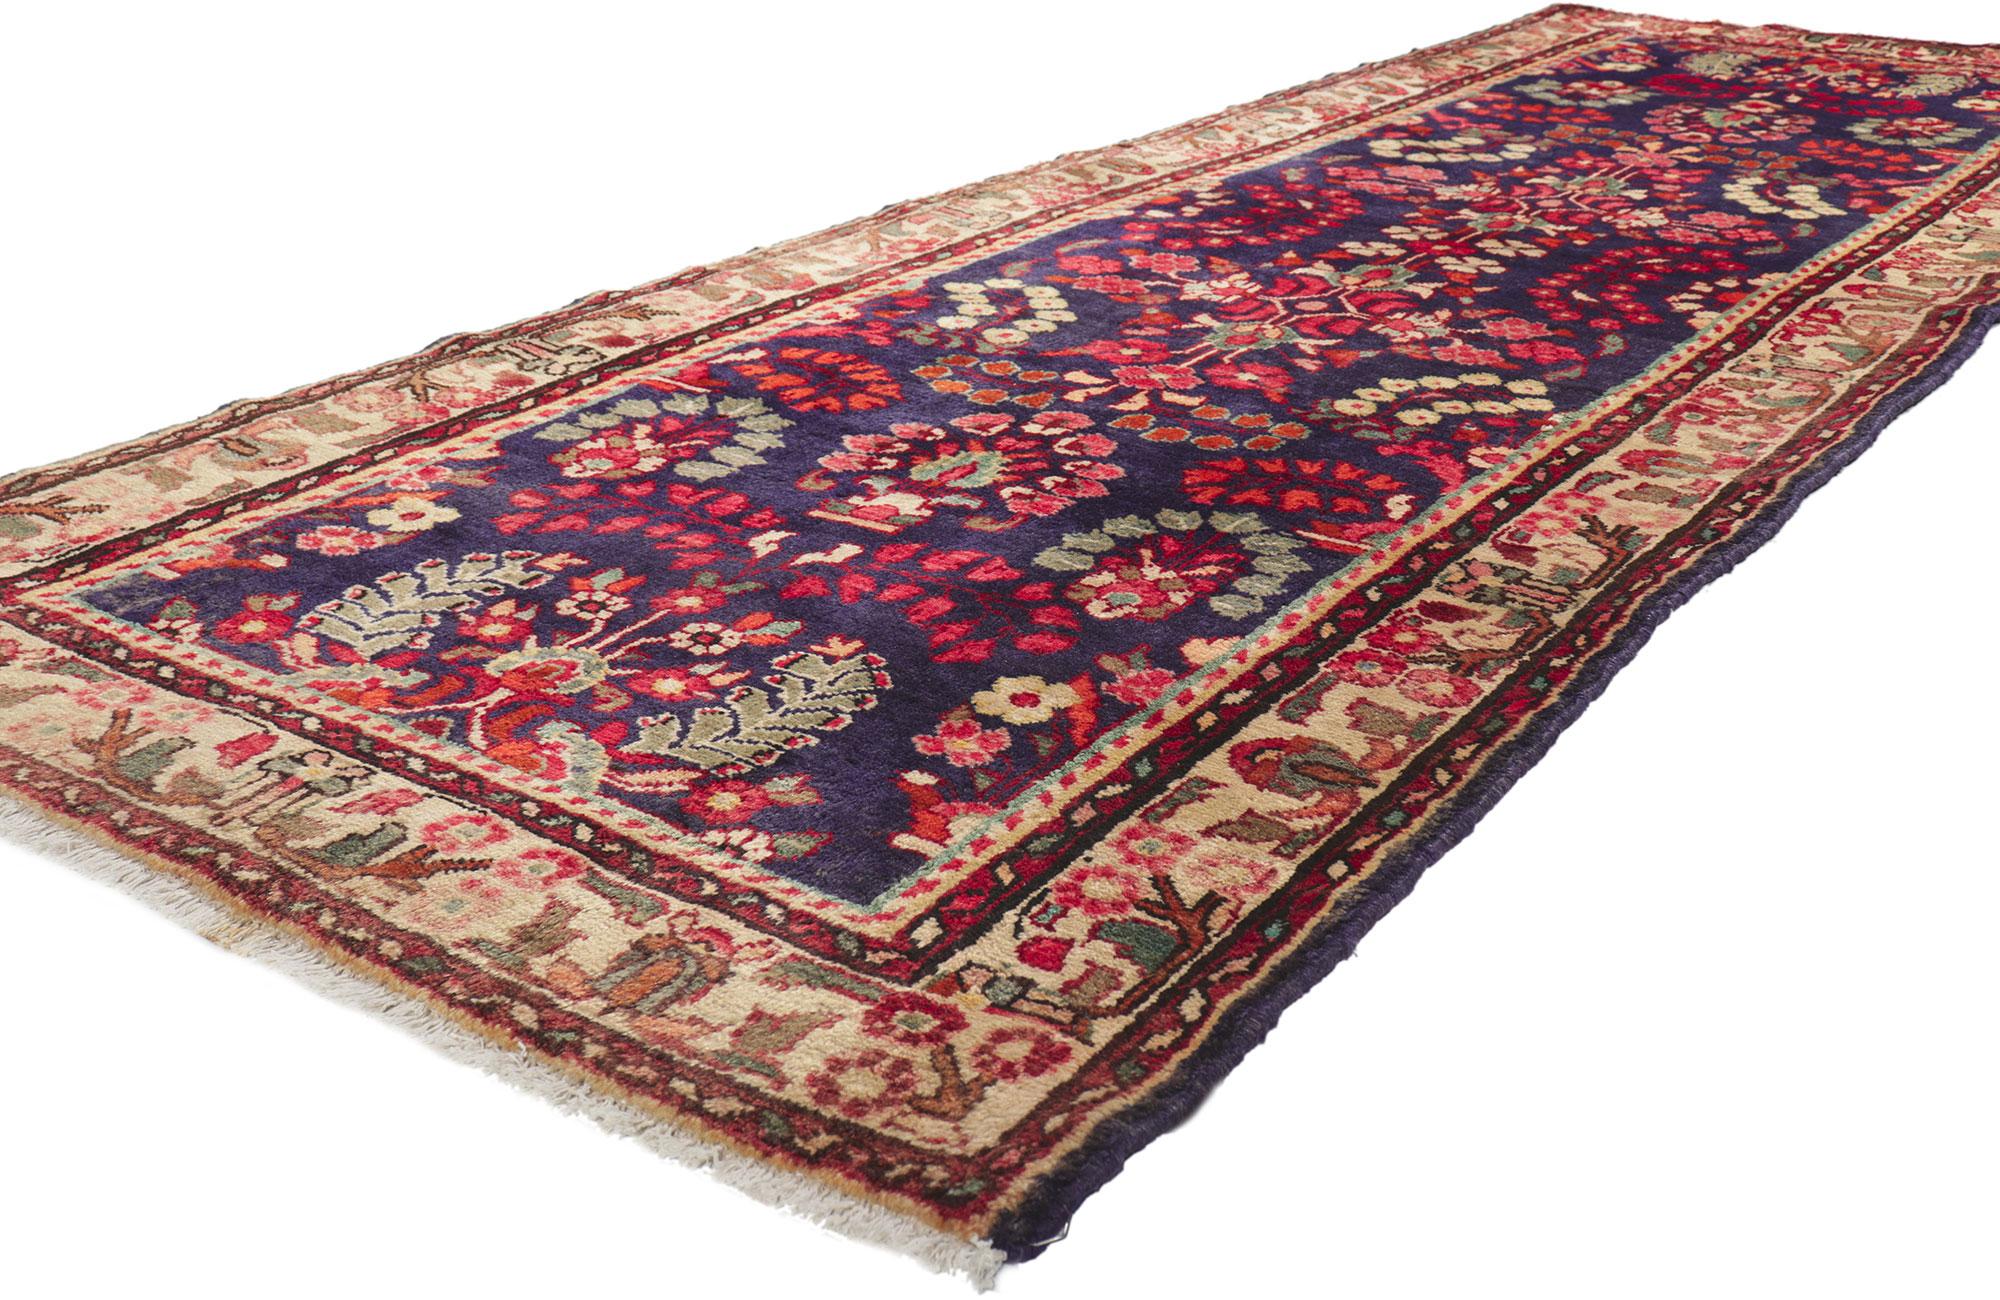 61225 Vintage Persian Hamadan Runner, 03'08 x 10'00. With its timeless style, incredible detail and texture, this hand knotted wool vintage Persian Hamadan rug is a captivating vision of woven beauty. The Sarouk design and refined colorway woven